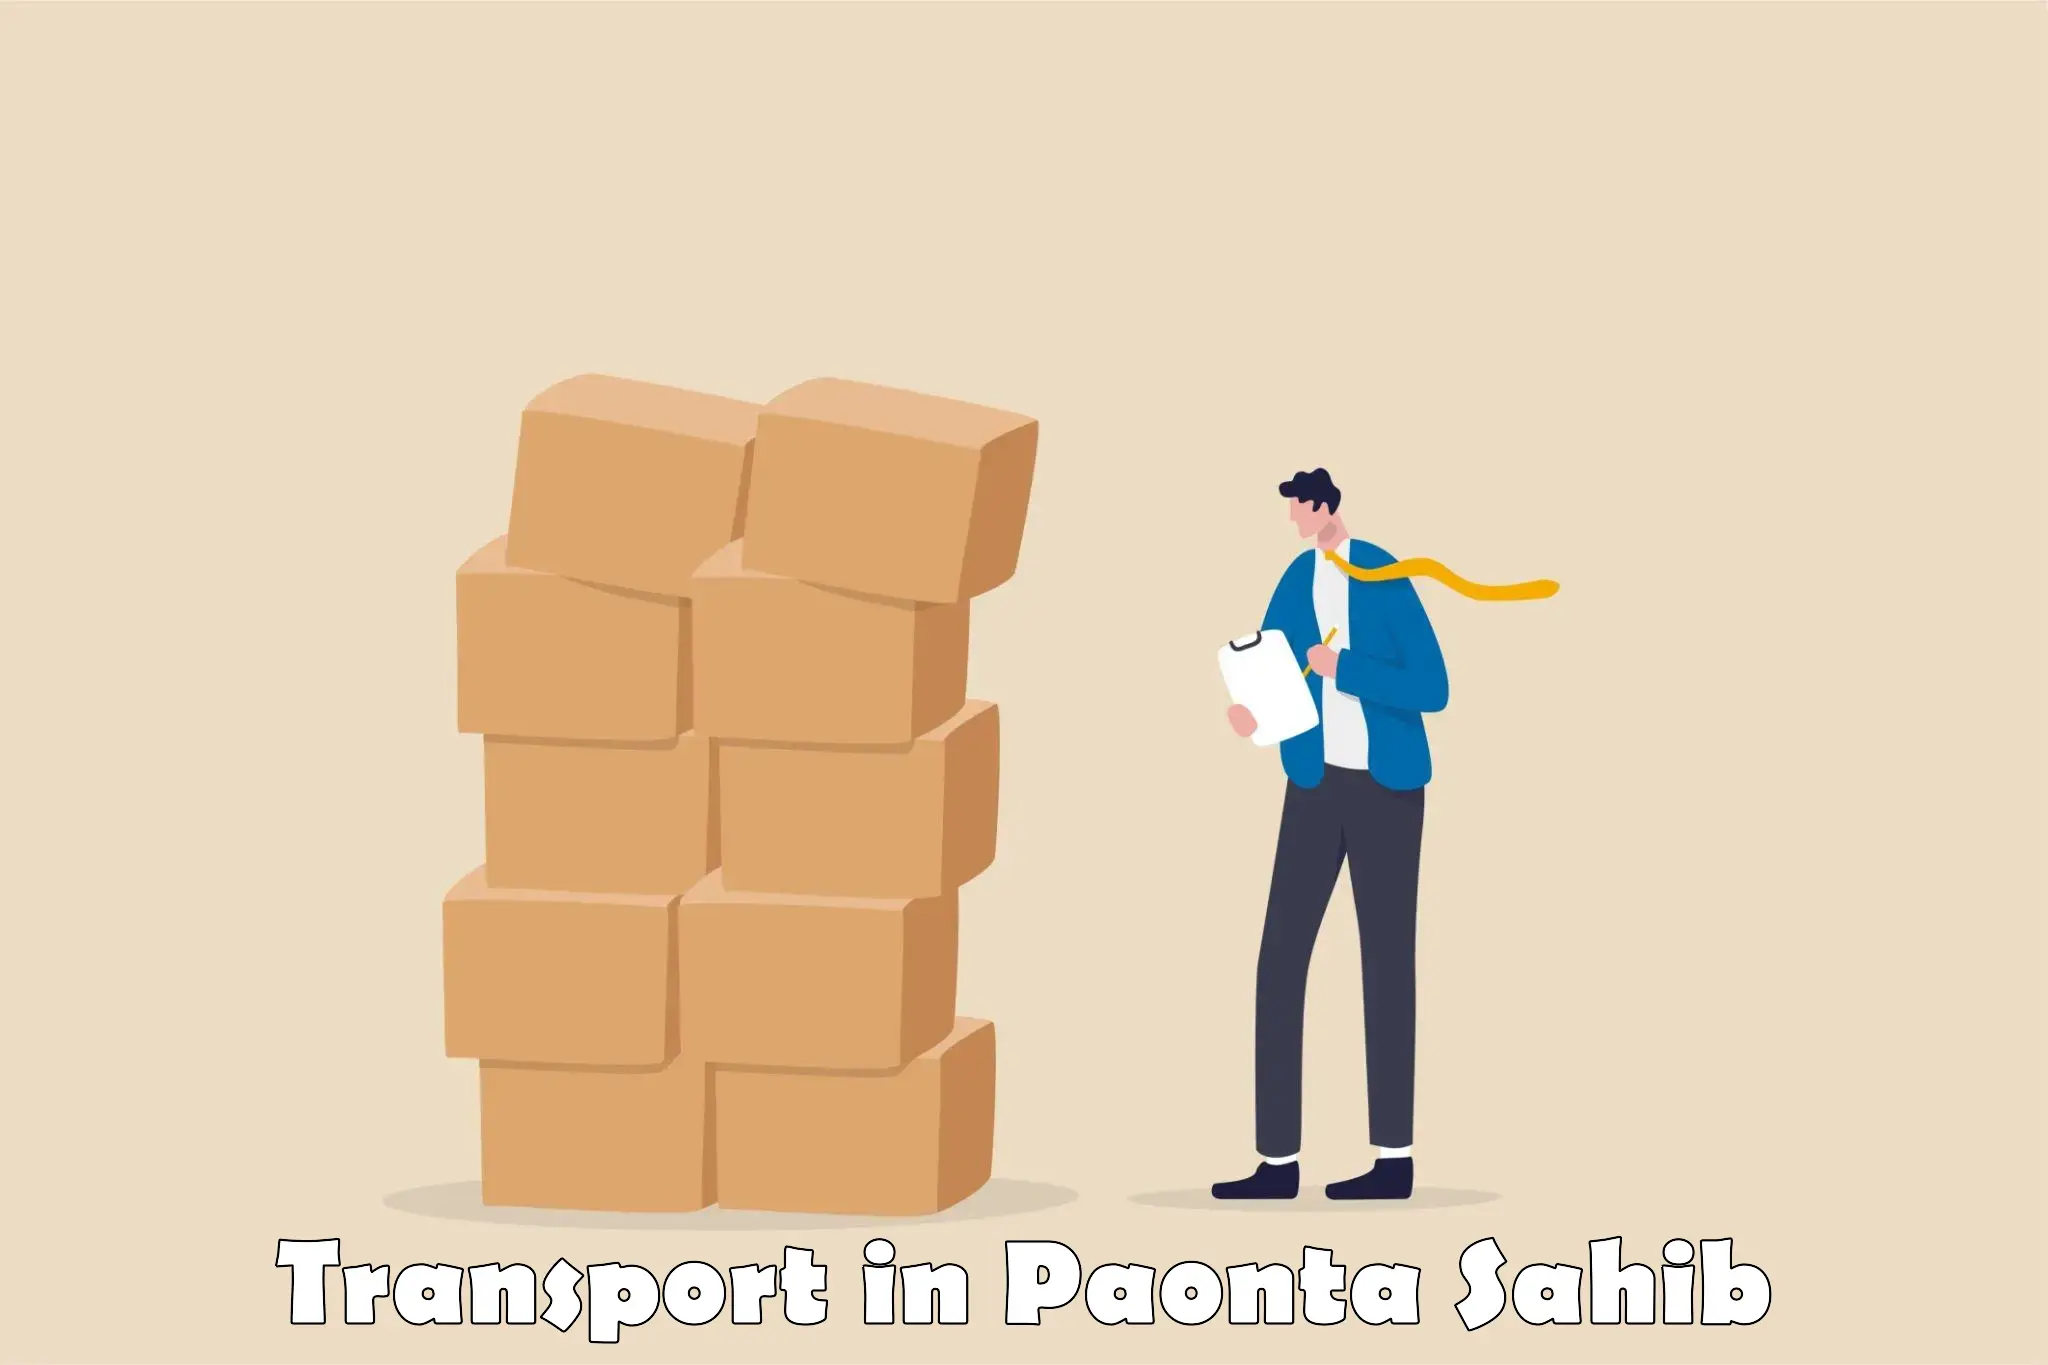 All India transport service in Paonta Sahib